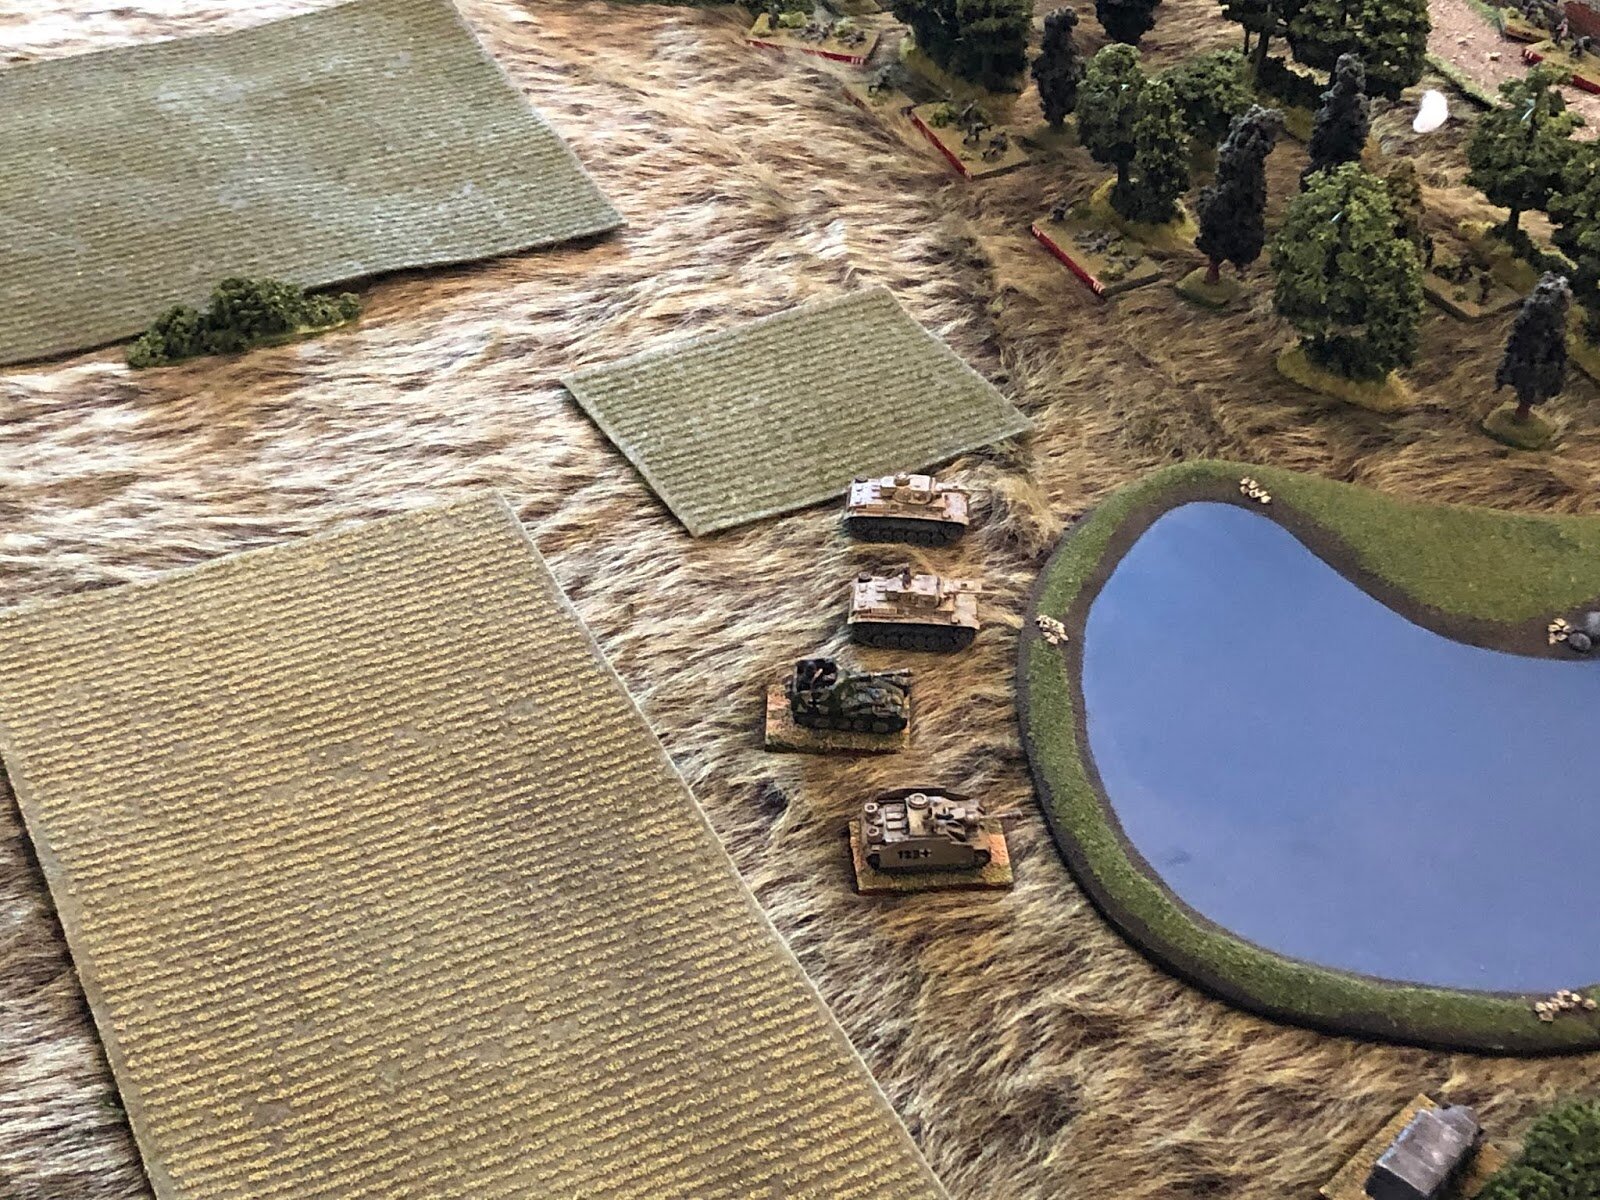  But probably not where you expected: the two Panzer IIIs, the Stug, and the Marder move right, up to the lip of the pond (being careful to avoid bogging in soft ground nearby) and take up firing positions. 